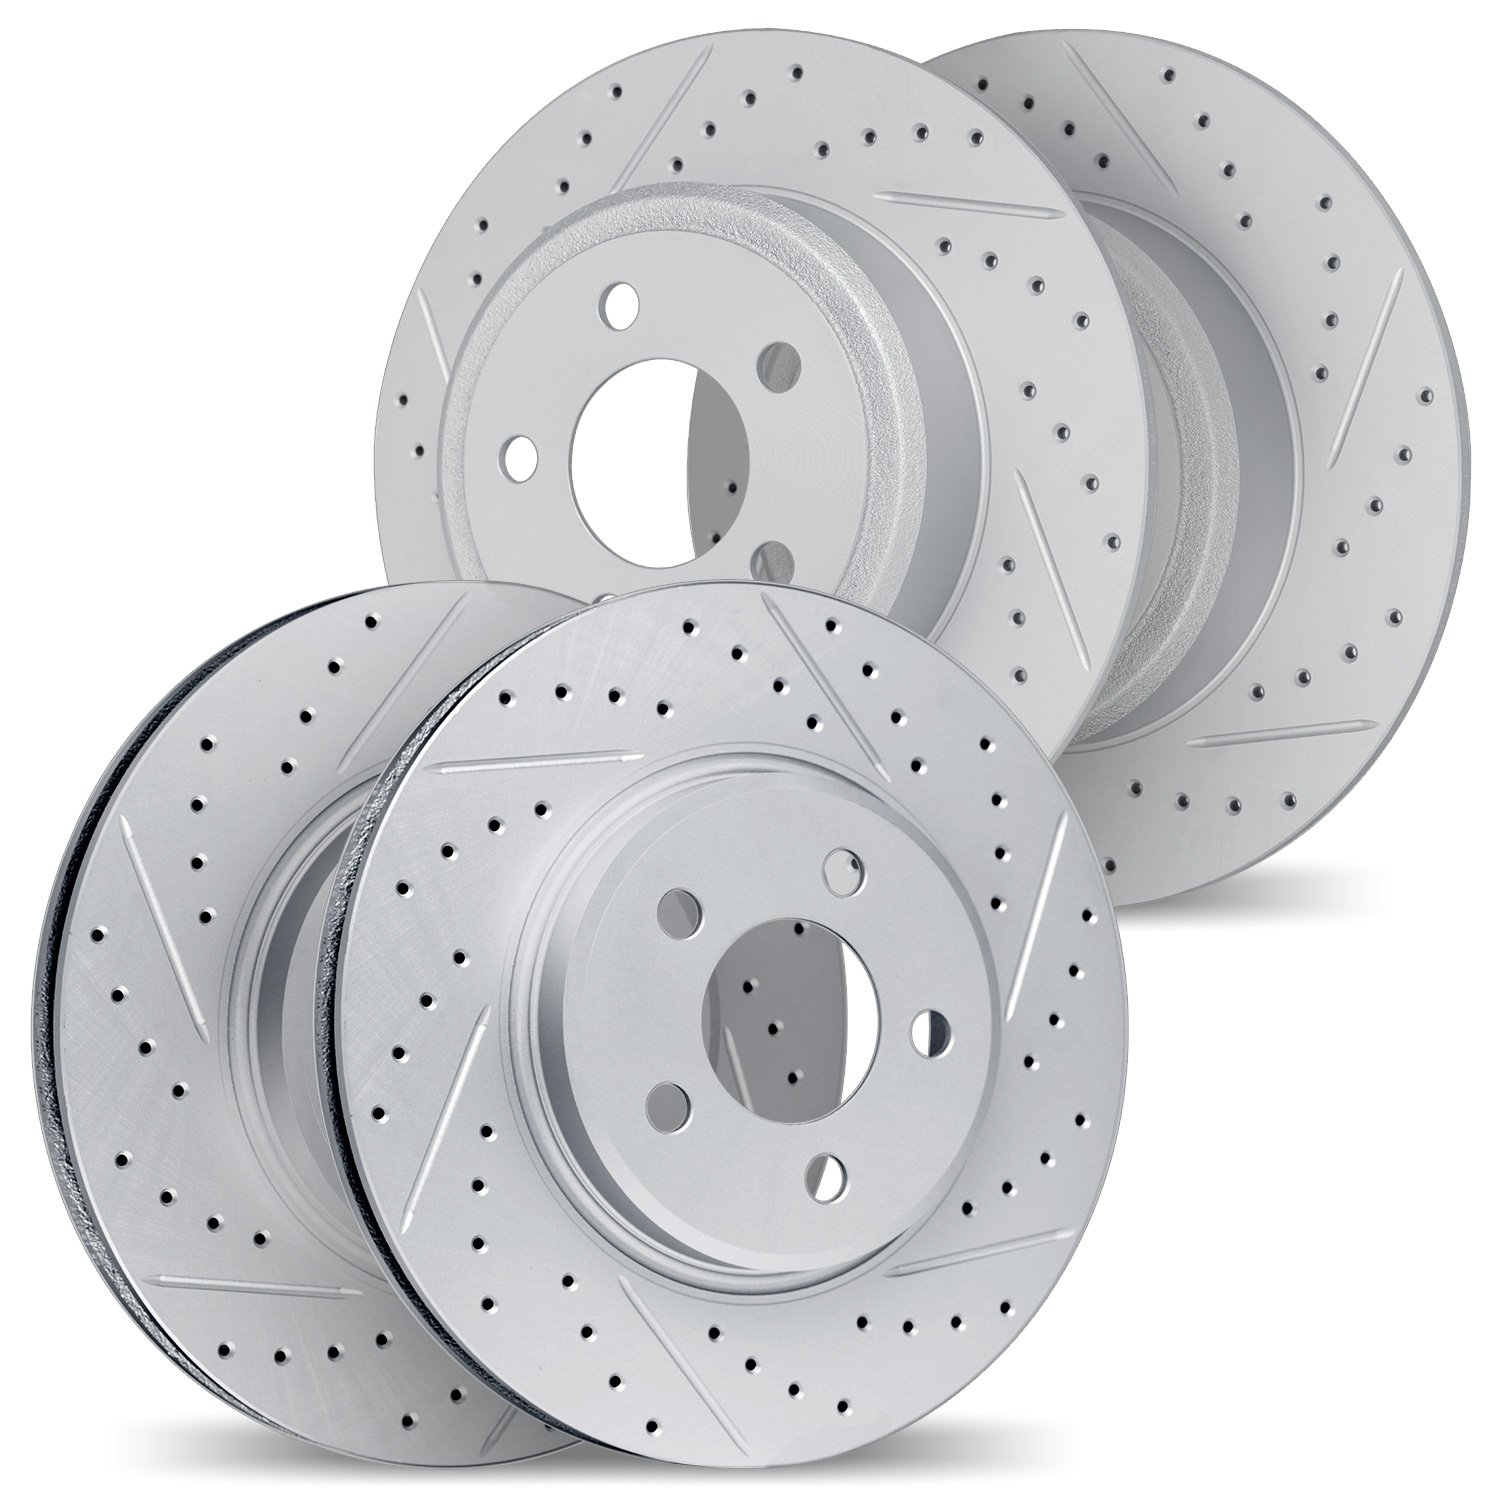 2004-03041 Geoperformance Drilled/Slotted Brake Rotors, 2013-2019 Kia/Hyundai/Genesis, Position: Front and Rear